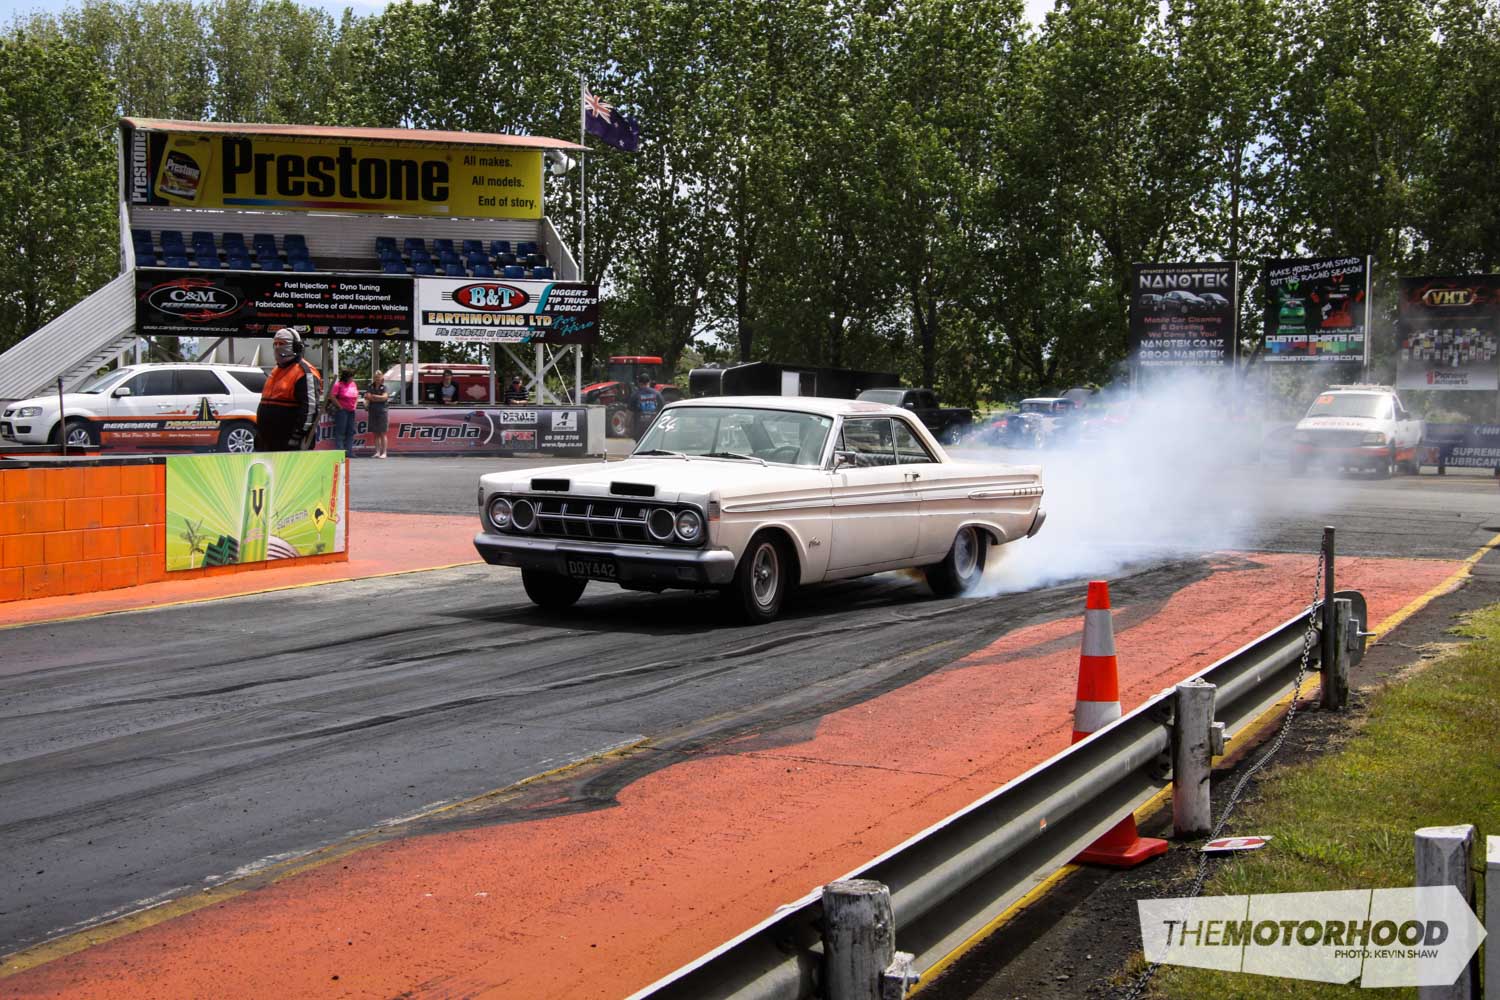   “Wheels” in his 1964 Mercury Comet Caliente ran consistent 14.3’s at 99mph, not bad for a little 302!  